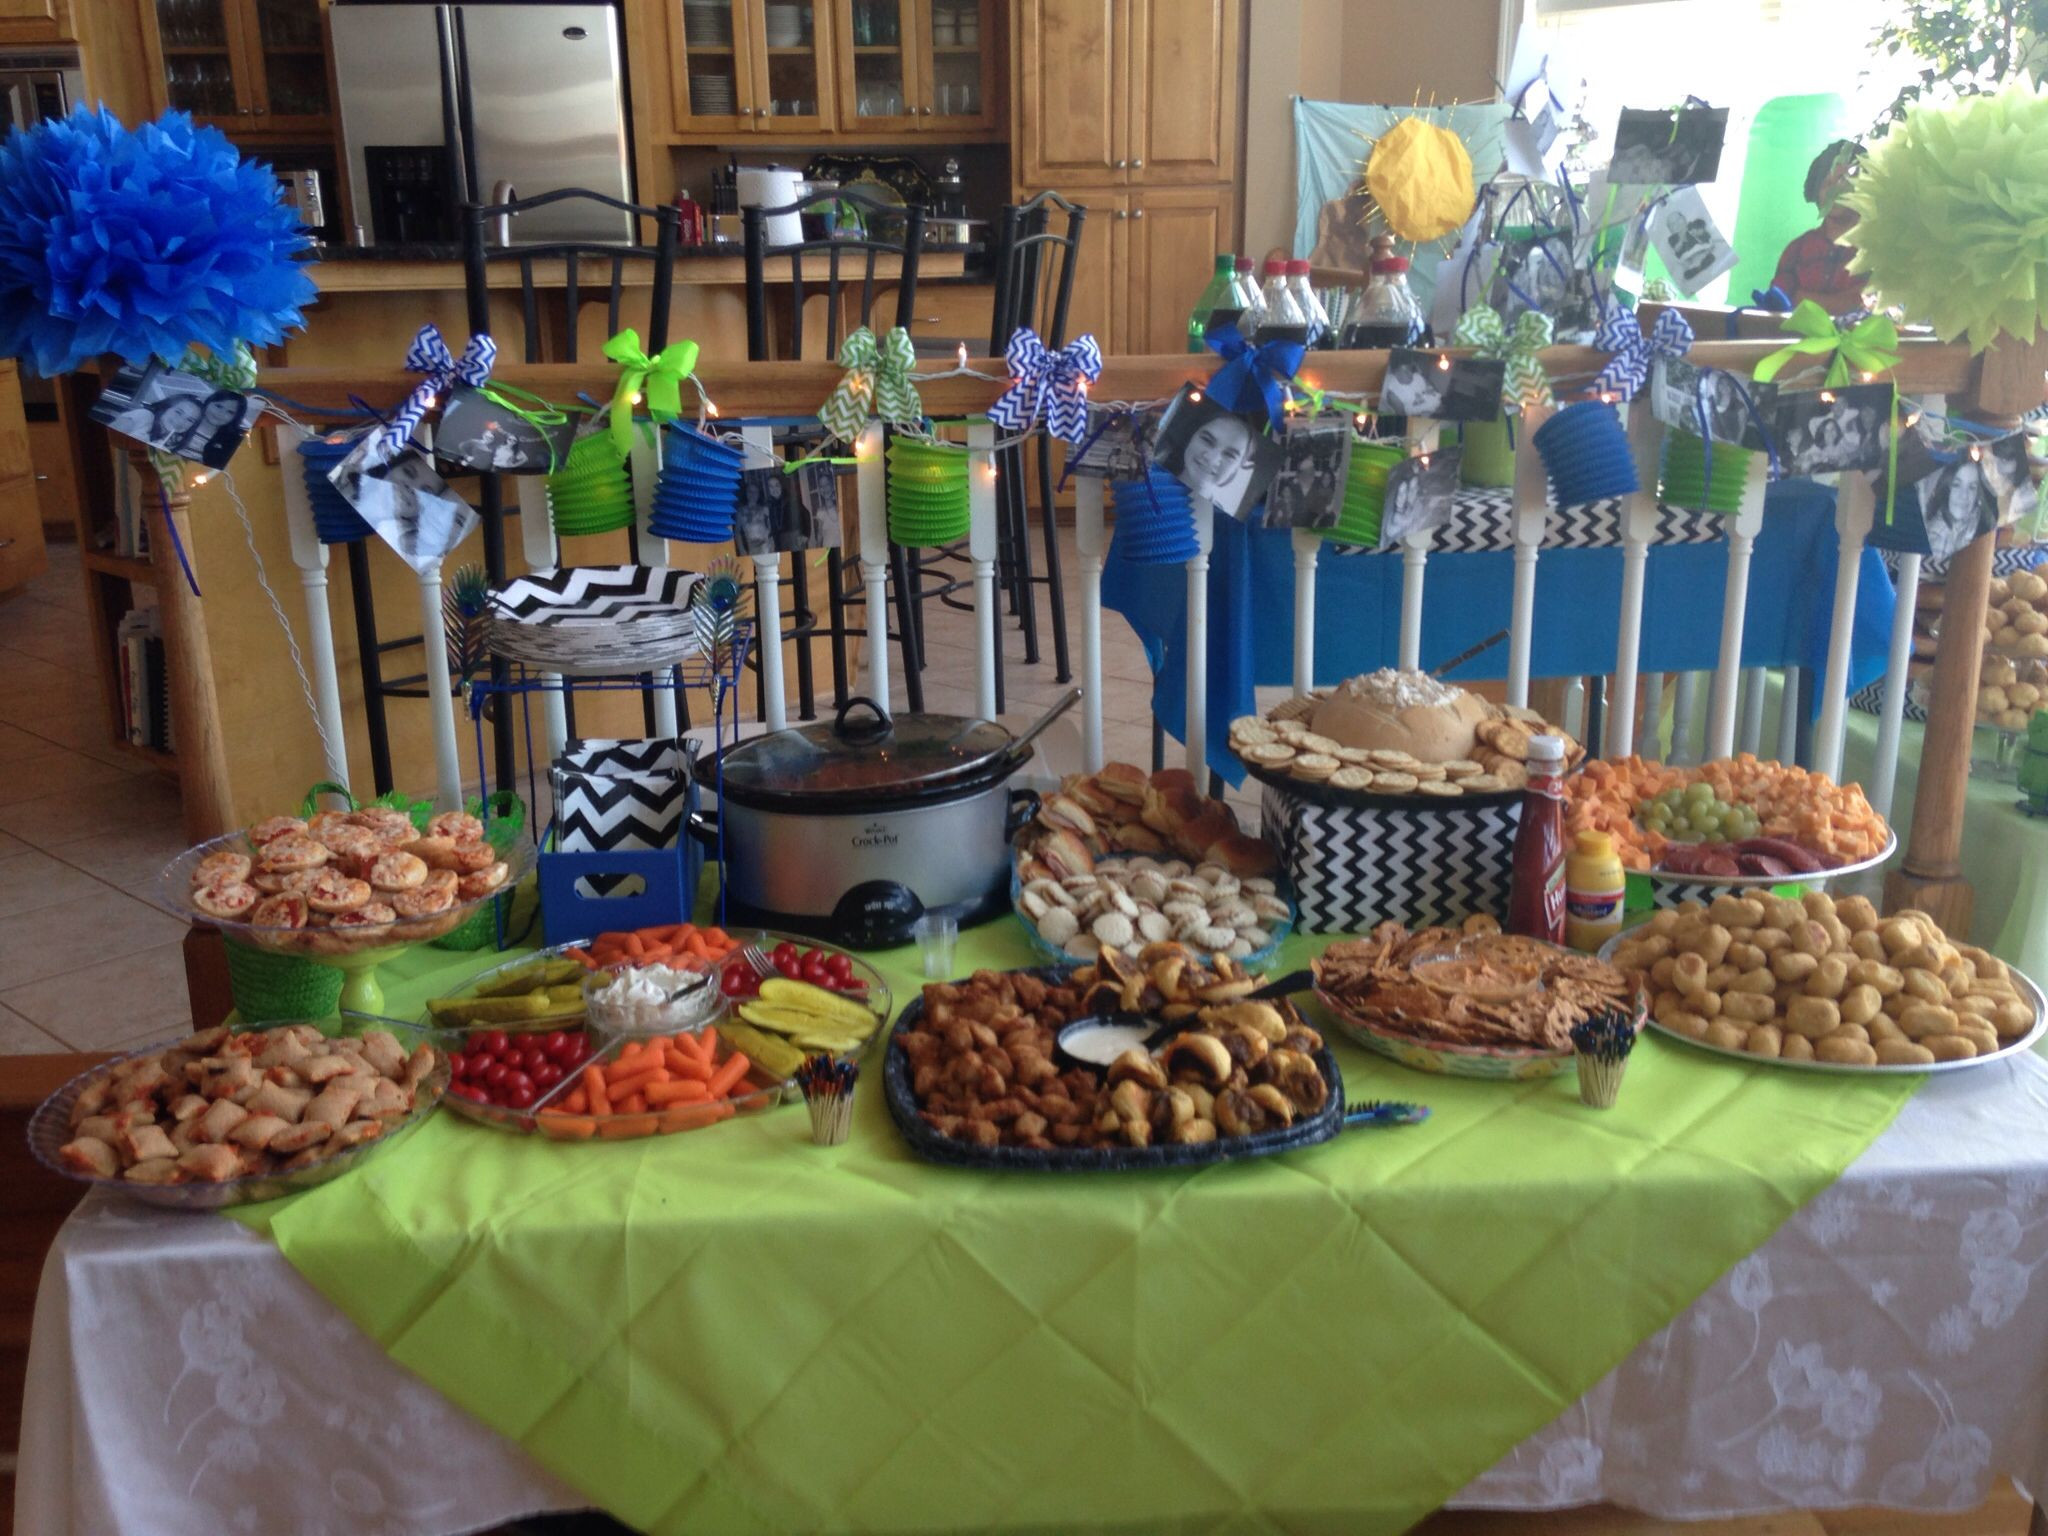 Birthday Party Ideas For A 13 Year Old Boy
 Pin by Alicia Clardy on Madison s 13th Birthday Party